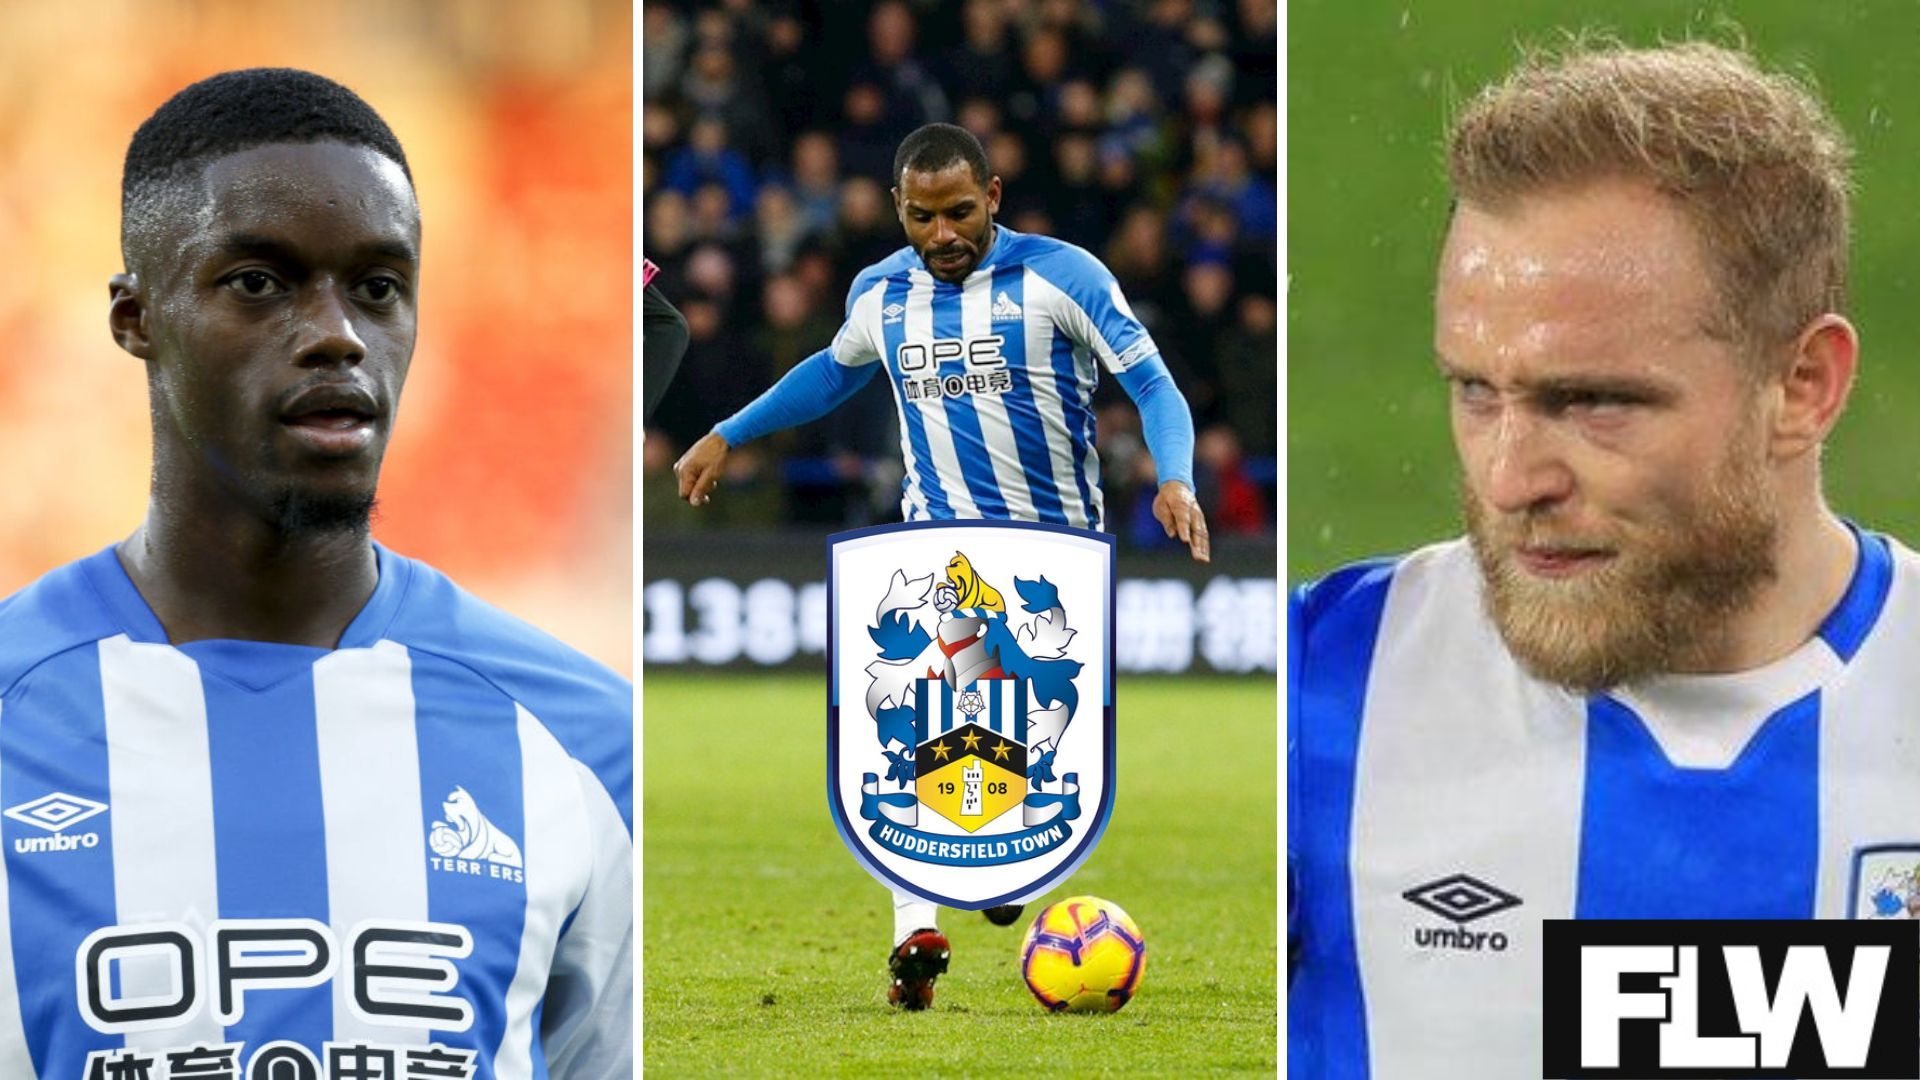 Huddersfield Town’s 3 most underwhelming signings from the last 10 years